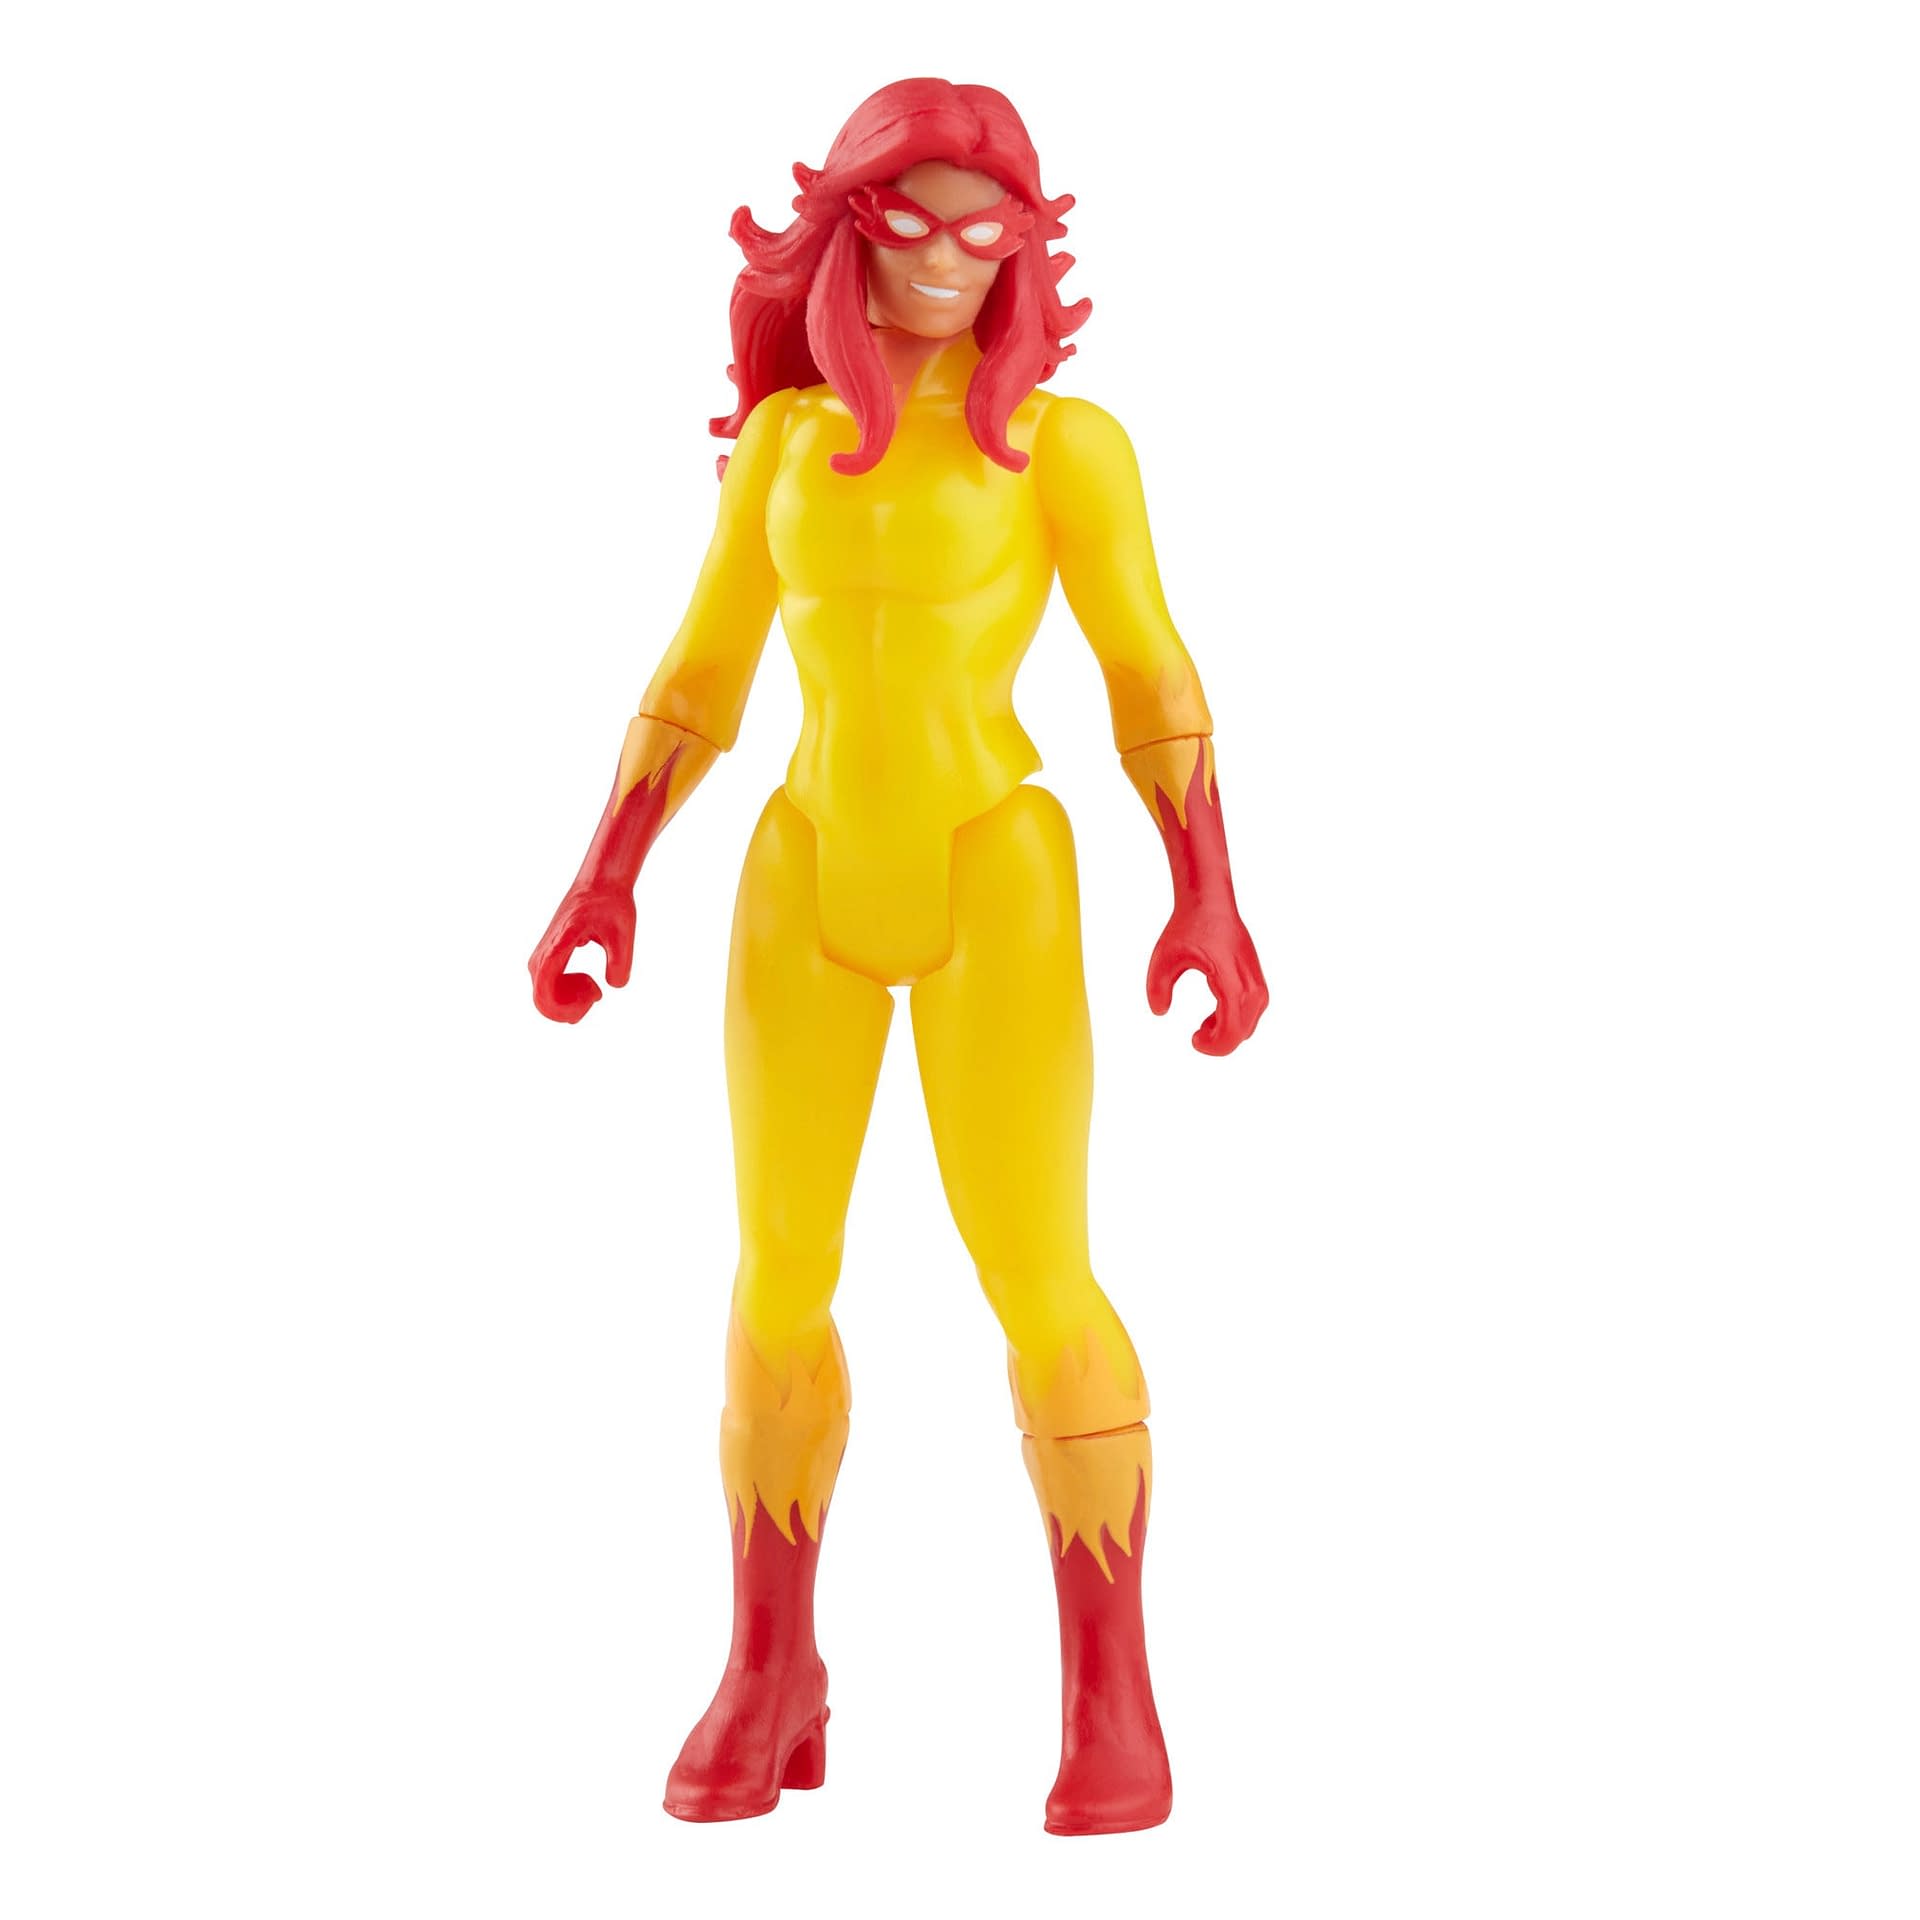 New Marvel Legends Retro Collection Figures Arrive from Hasbro 